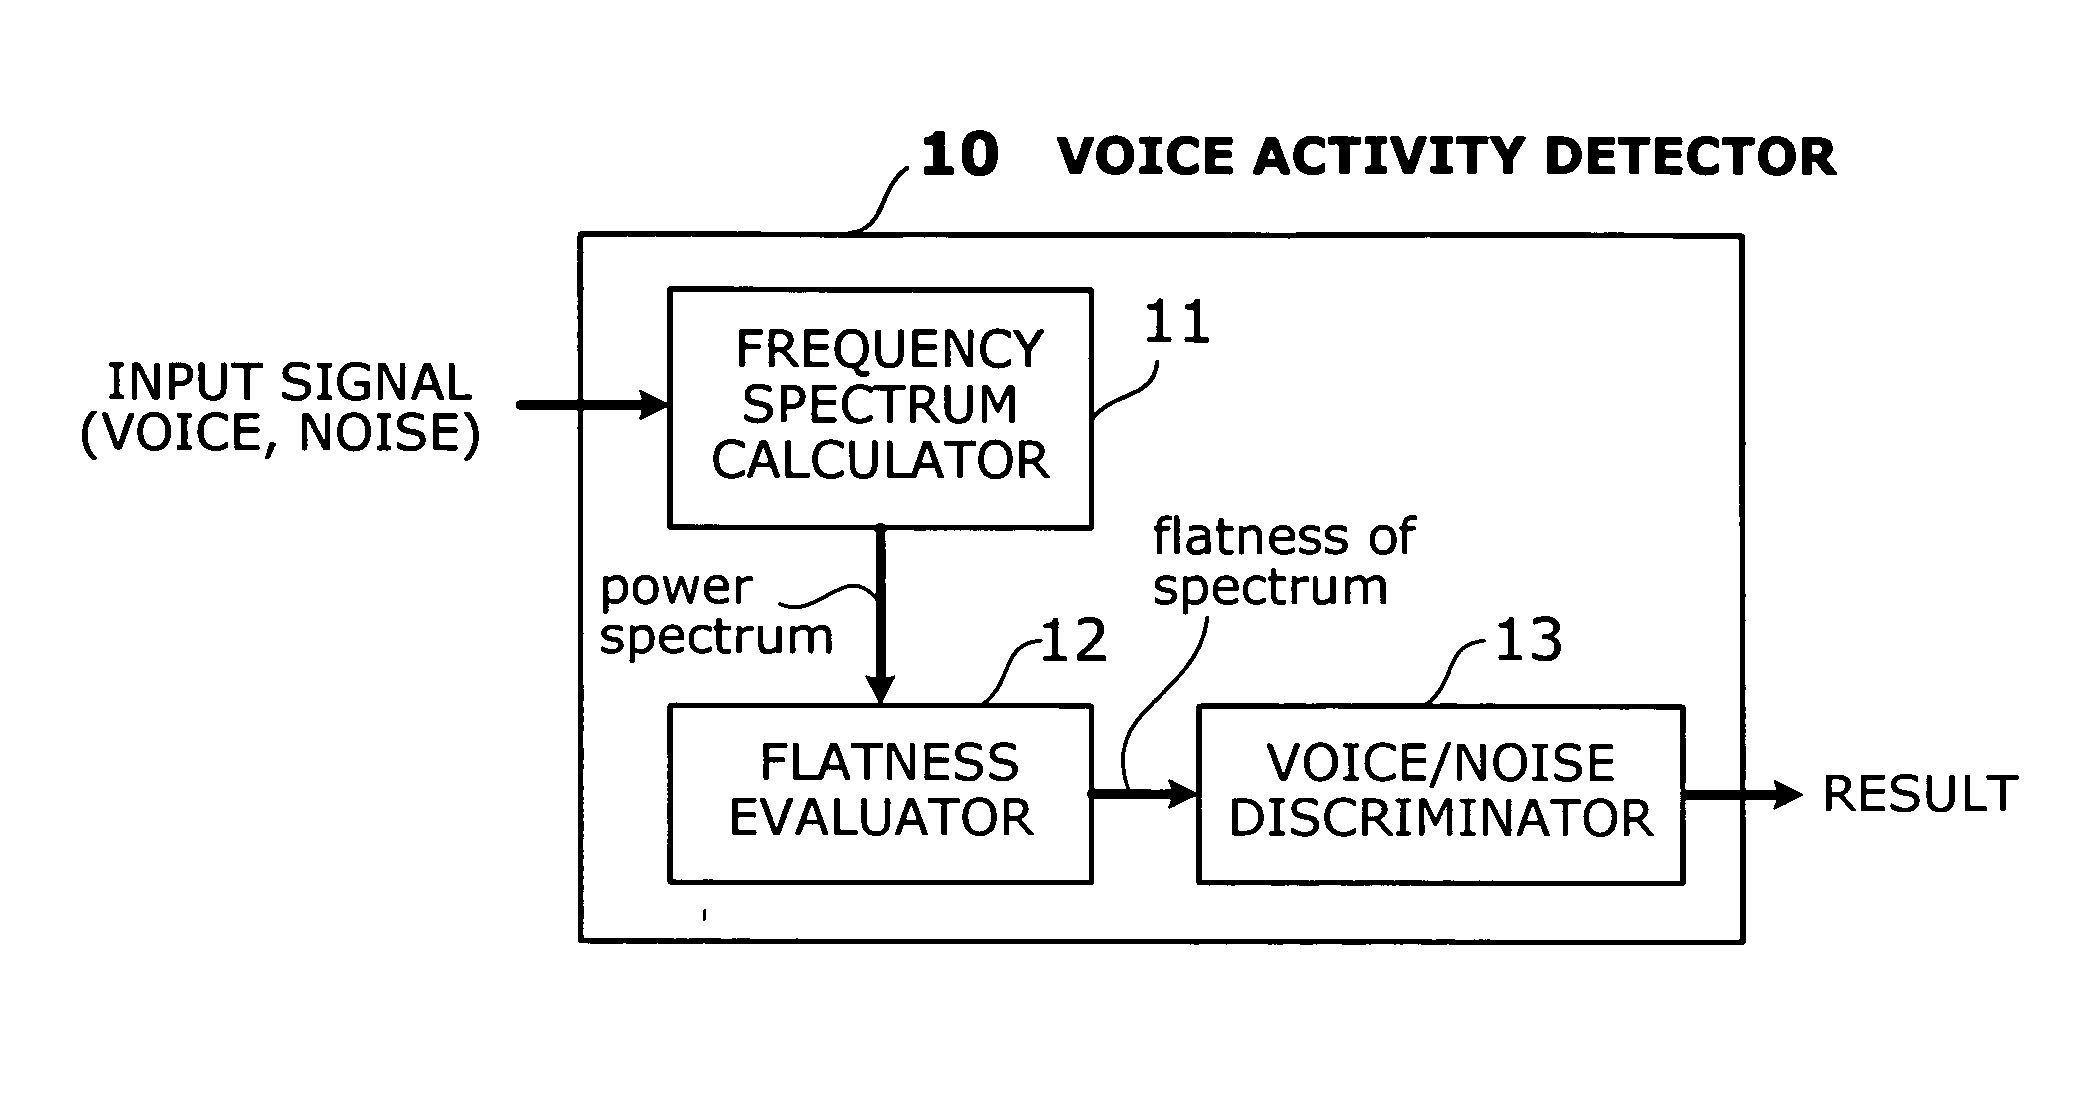 Voice activity detector based on spectral flatness of input signal